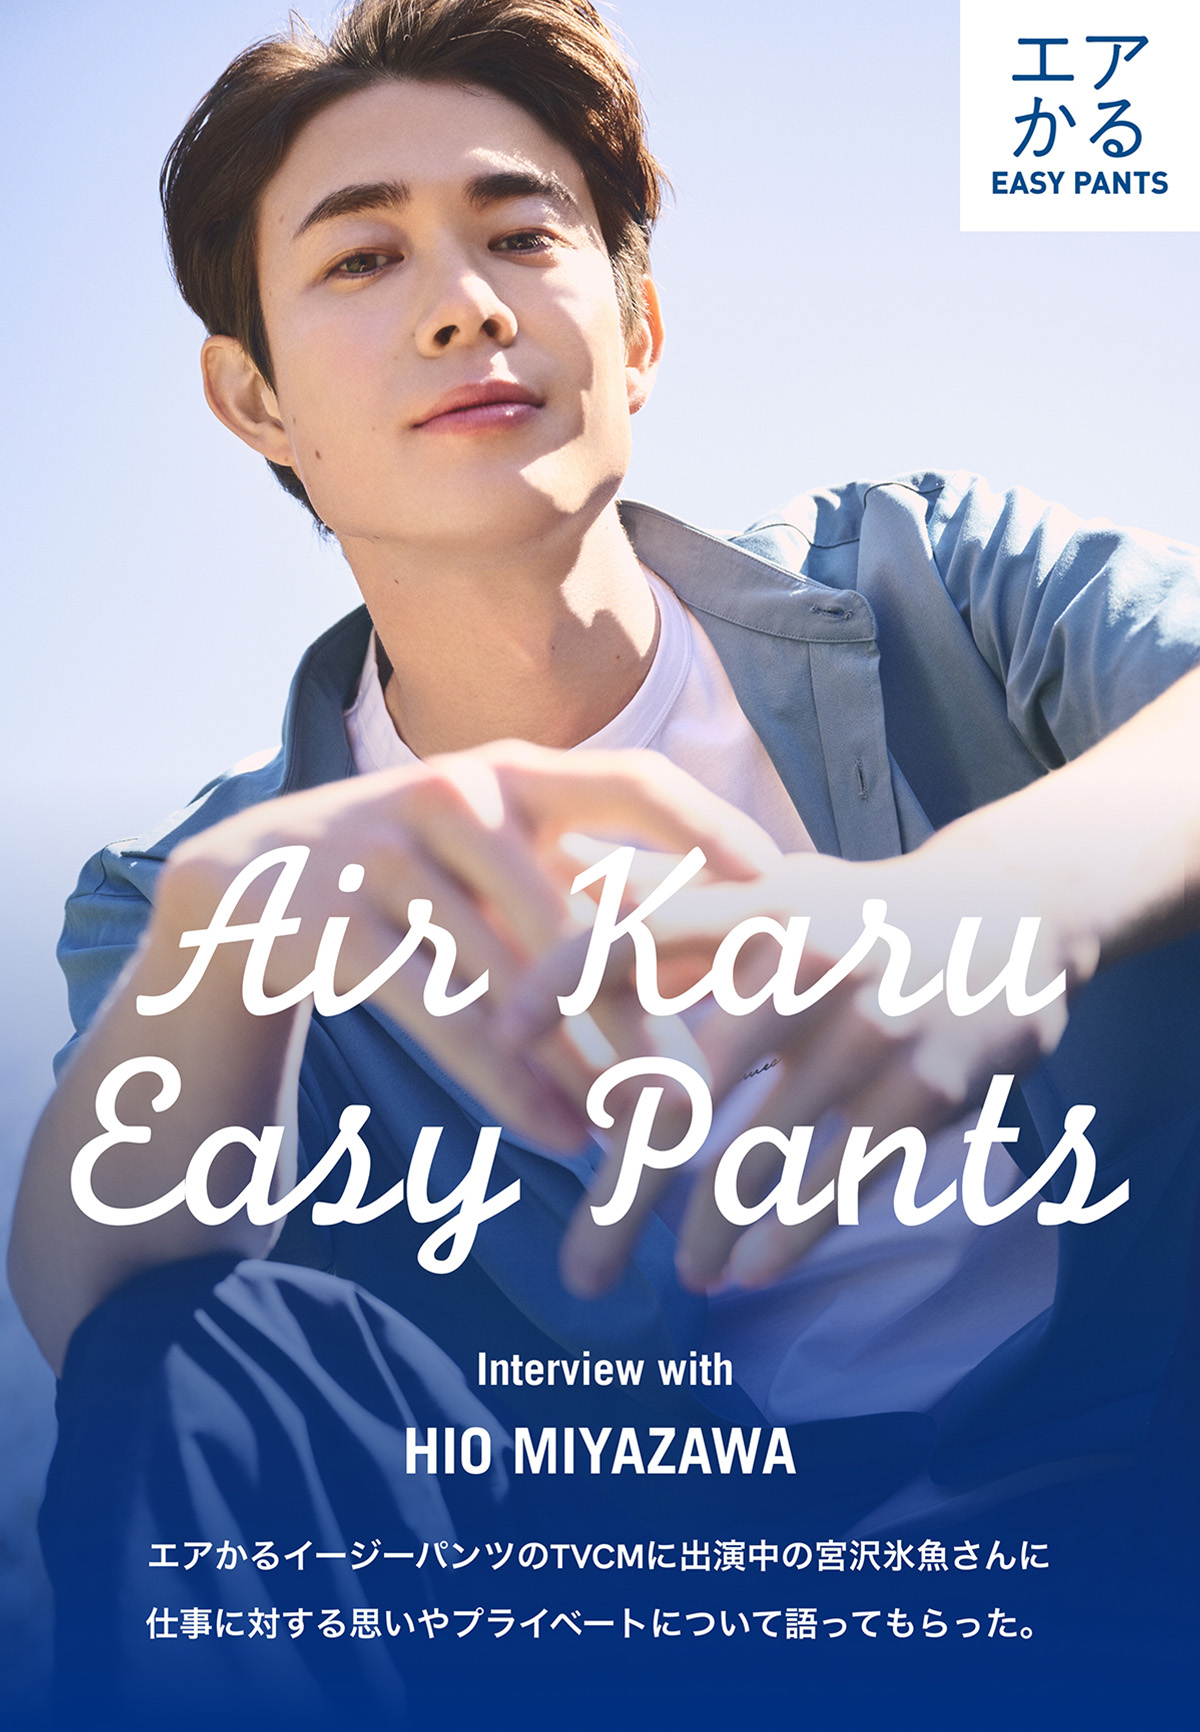 Can't-Go-Wrong Clothes. Air-Karu Easy Pants Look